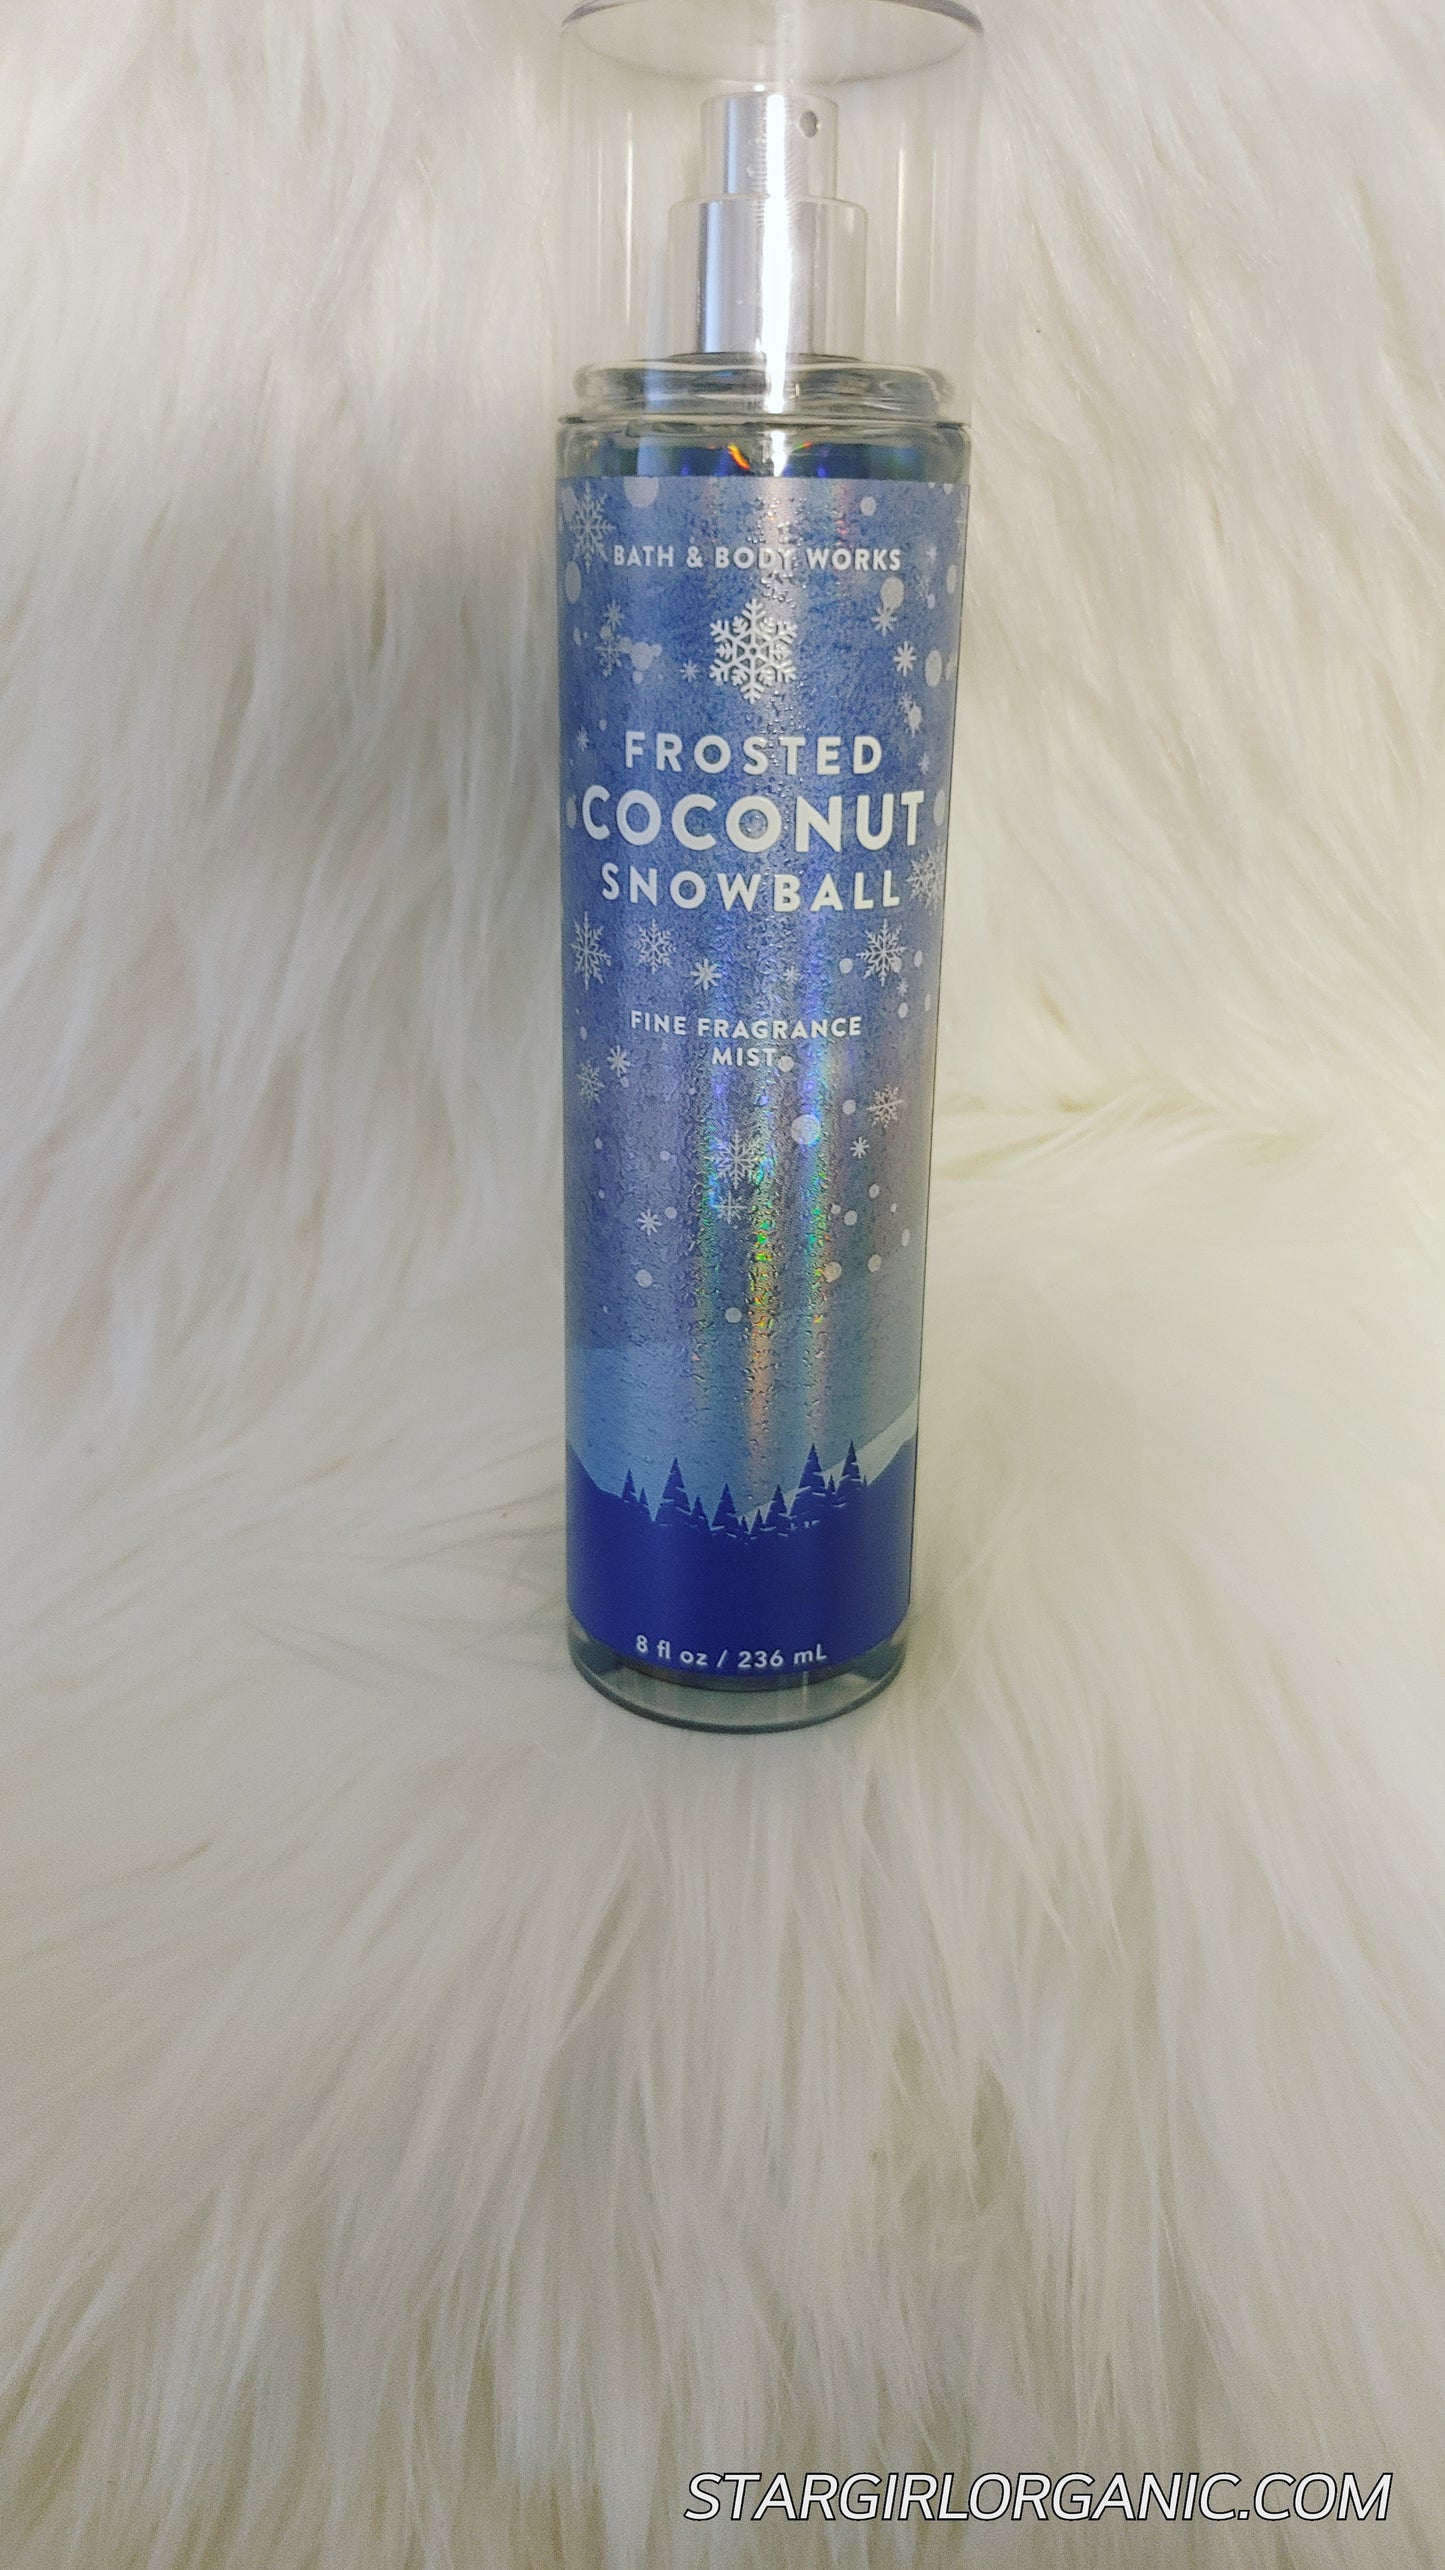 Bath and Body Works Frosted Coconut Snowball Fragrance Mist